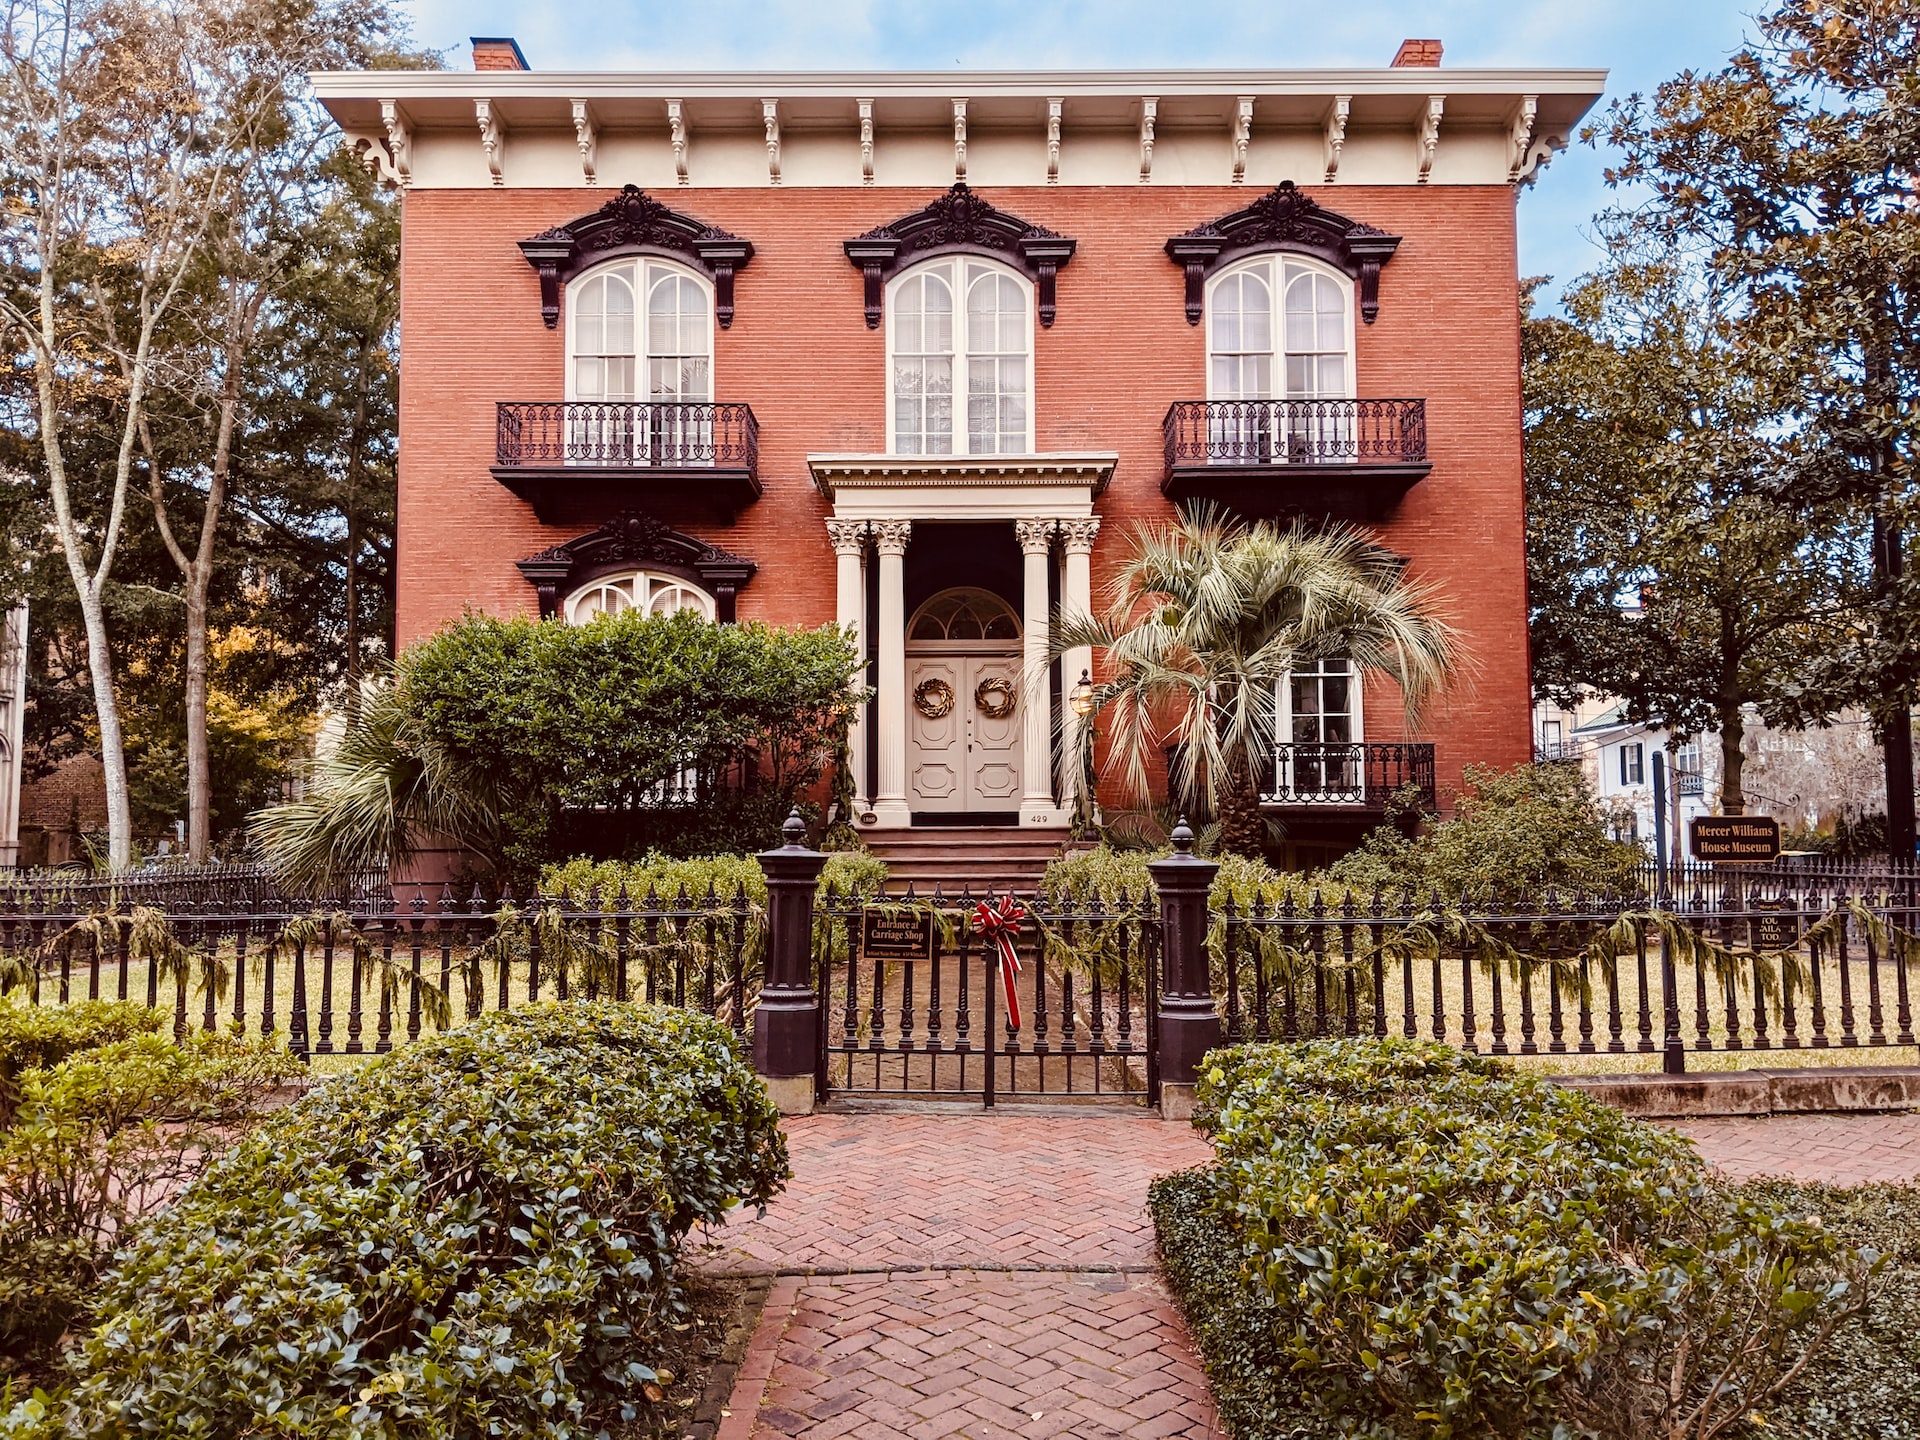 The Marshall House is a haunted spot in Savannah that is great to visit for Halloween
